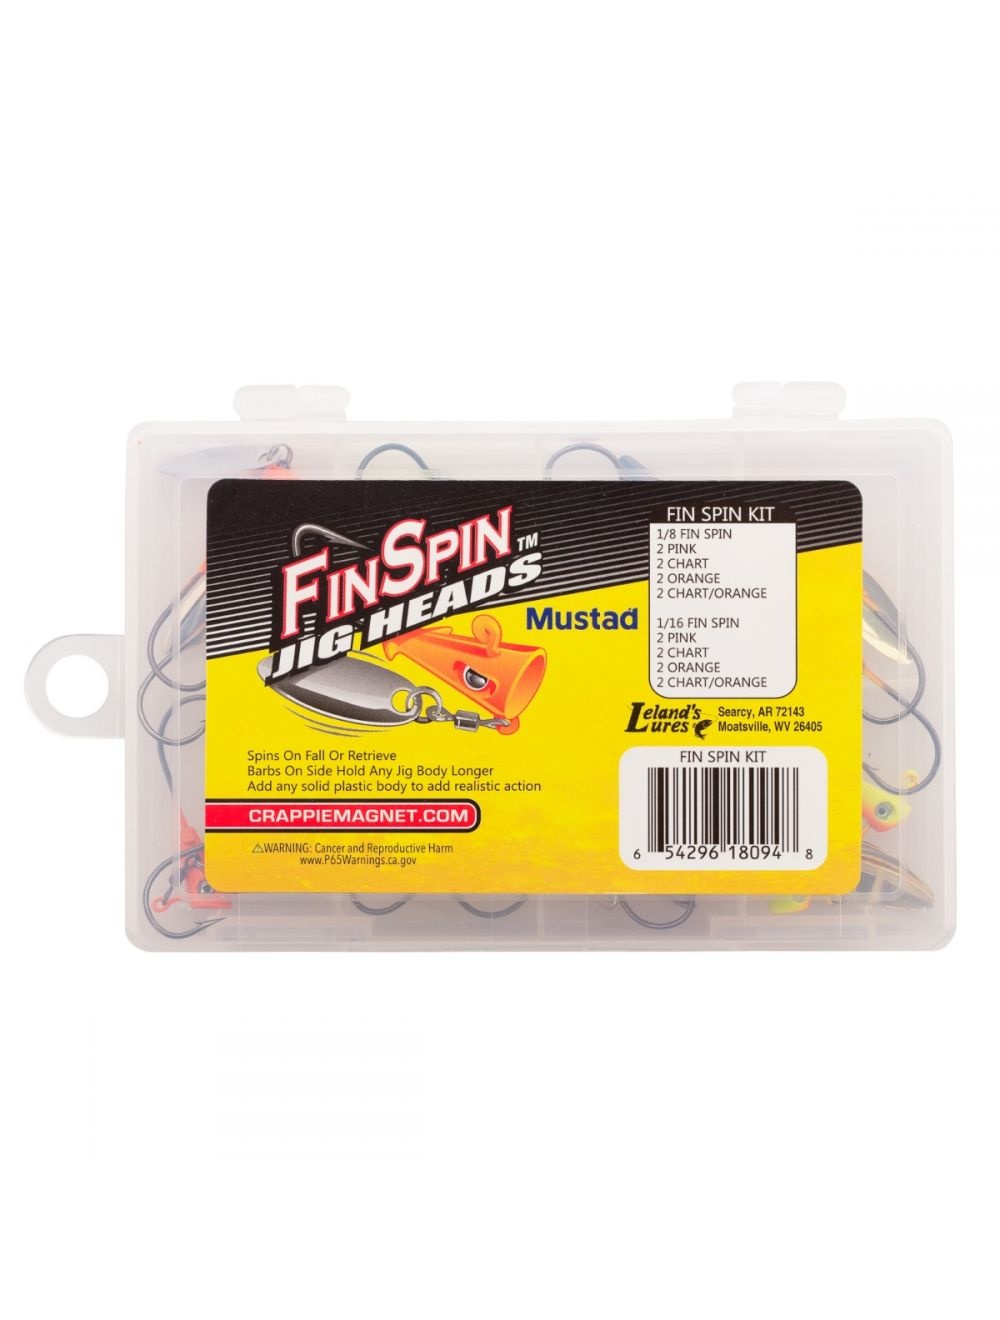 Crappie Magnet Fin Spins Kit - Tackle Shack